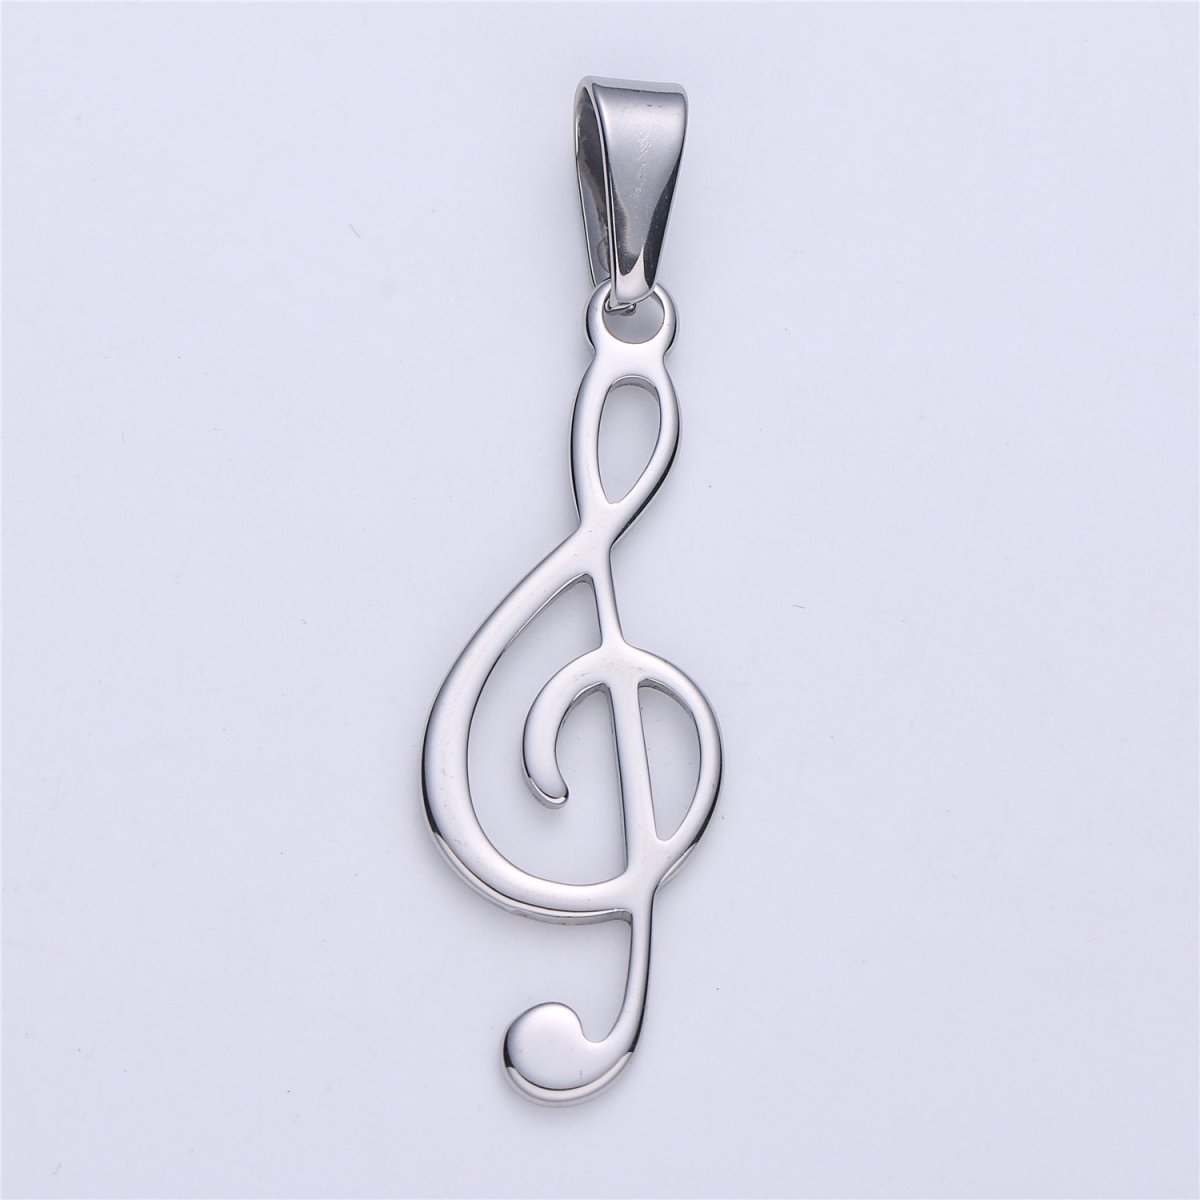 Gold Filled Stainless Steel Musical Note Pendant, Note Charm Music Lovers Gift Jewelry Silver Note Charm for Necklace Bracelet Making J-669 - DLUXCA